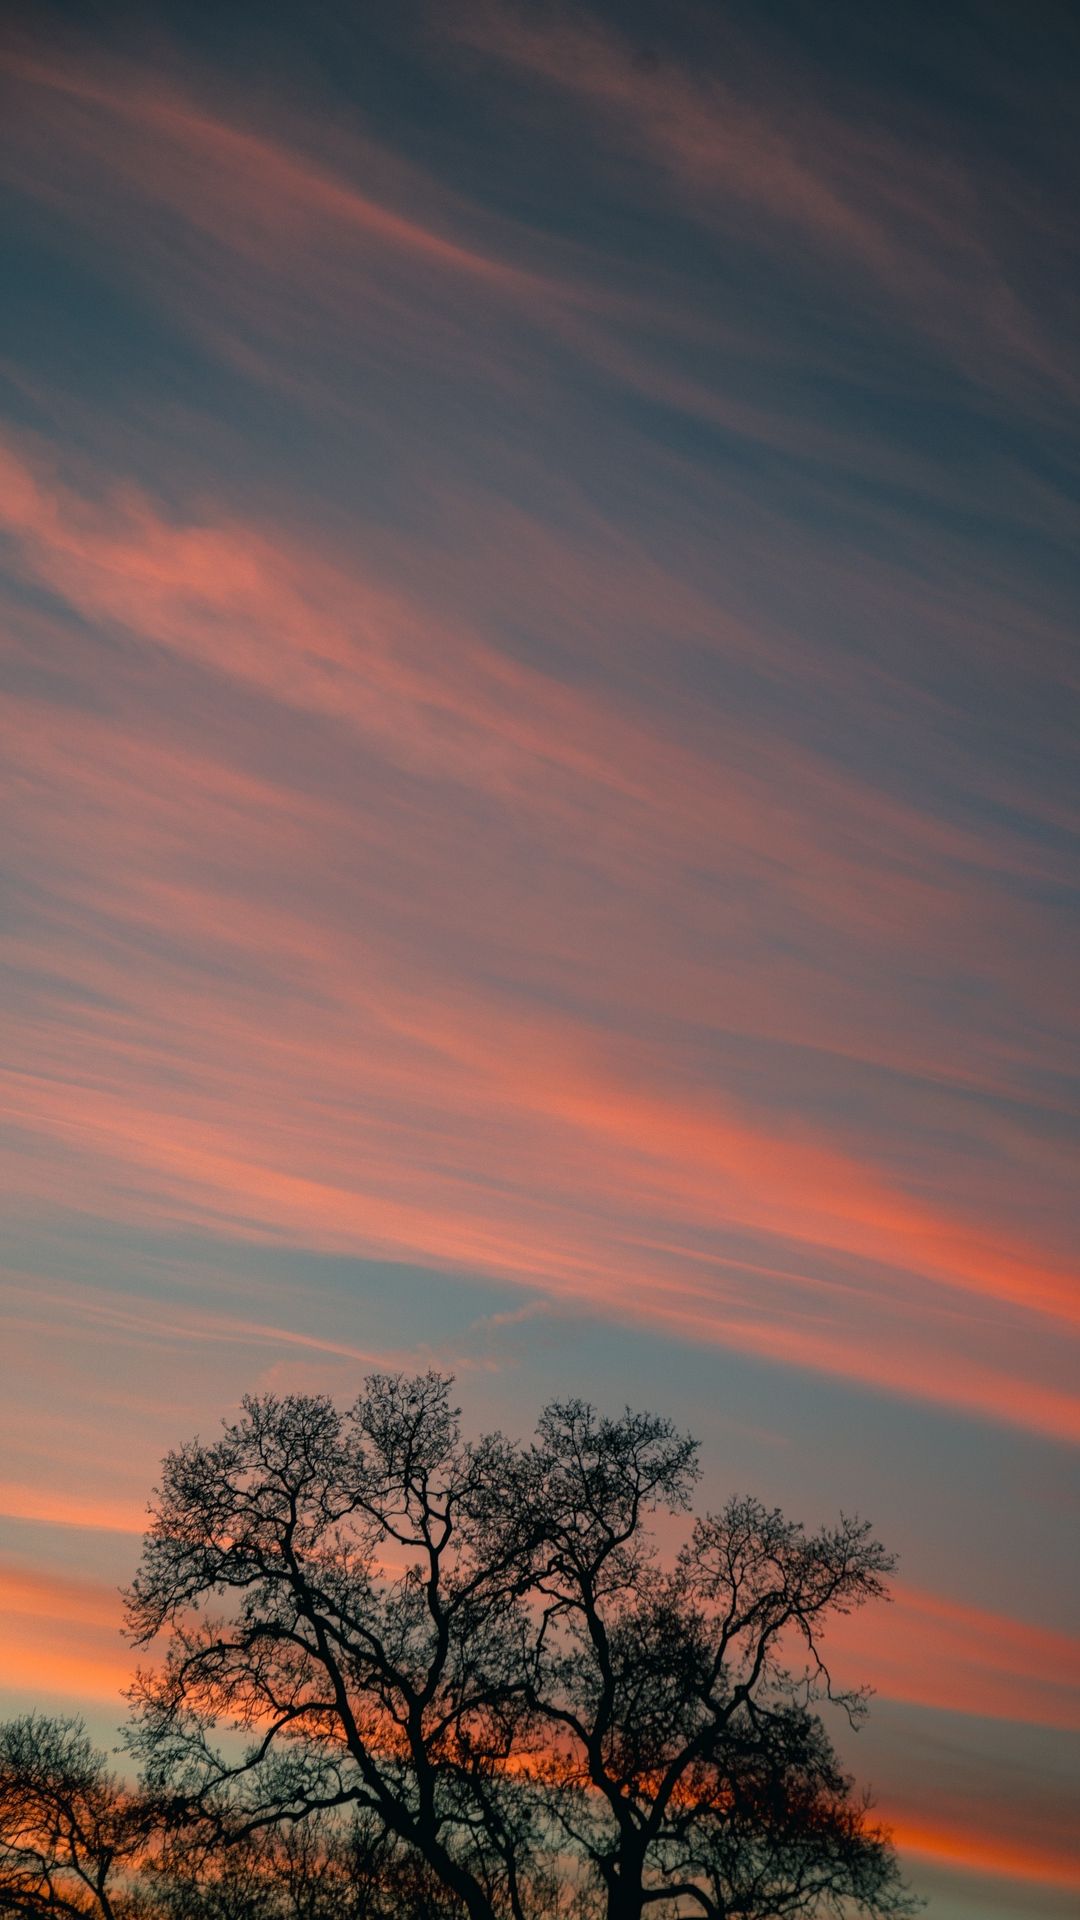 Download wallpaper 1080x1920 tree, branches, sky, clouds, sunset, stripes samsung galaxy s4, s5, note, sony xperia z, z1, z2, z3, htc one, lenovo vibe hd background